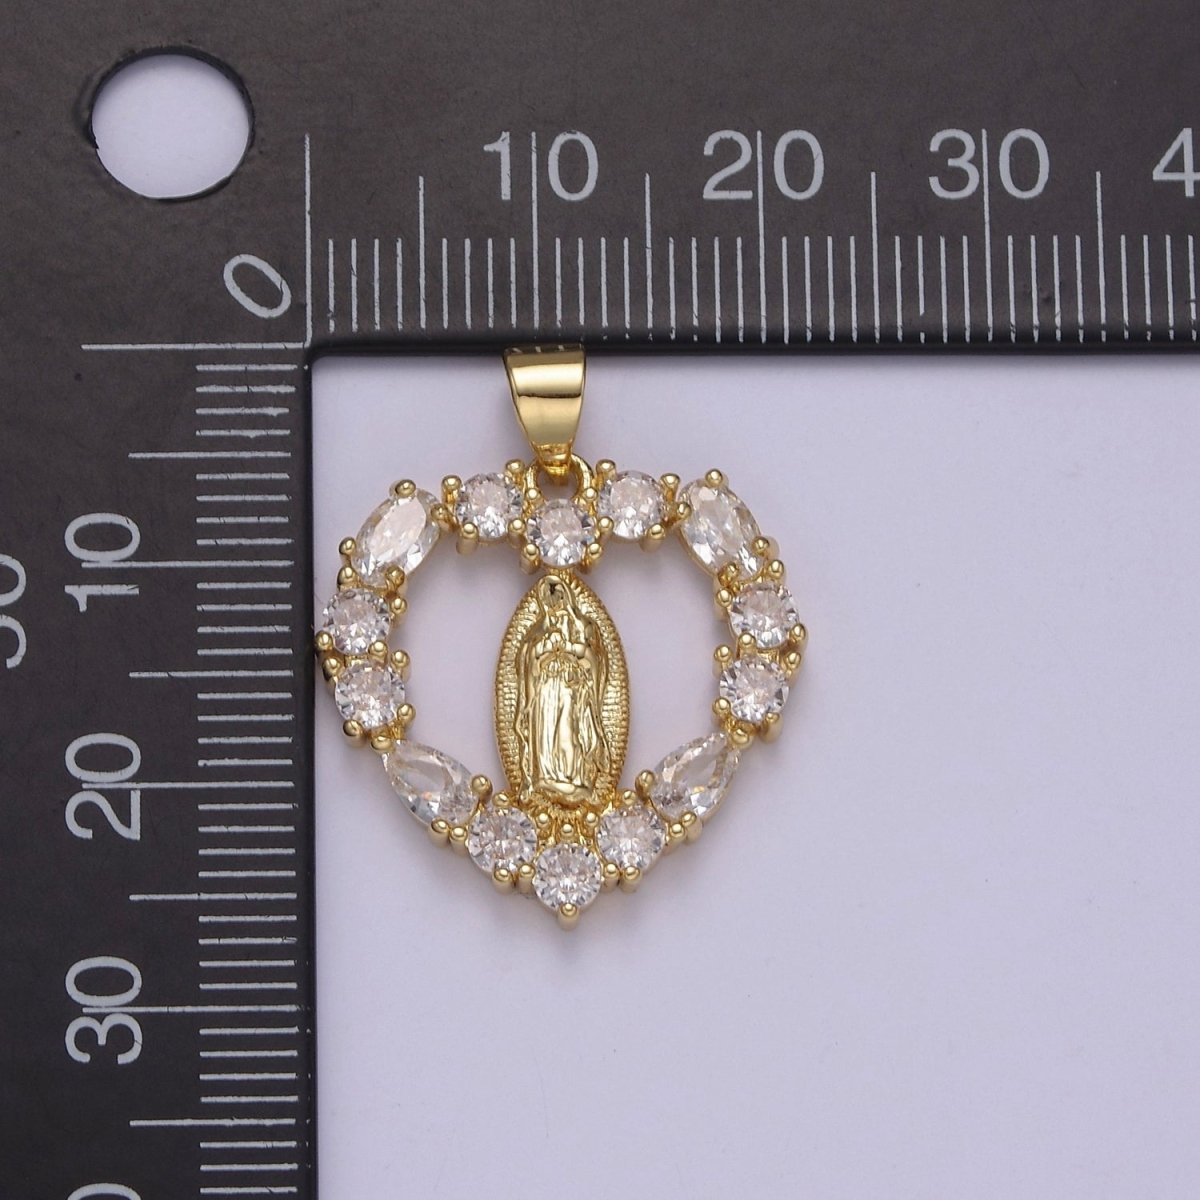 Gold Virgin Mary On Heart Emblem Shape Pendant Religious Charm Lady Guadalupe Pave Pendant, Dainty Gold Charm J-357 - DLUXCA